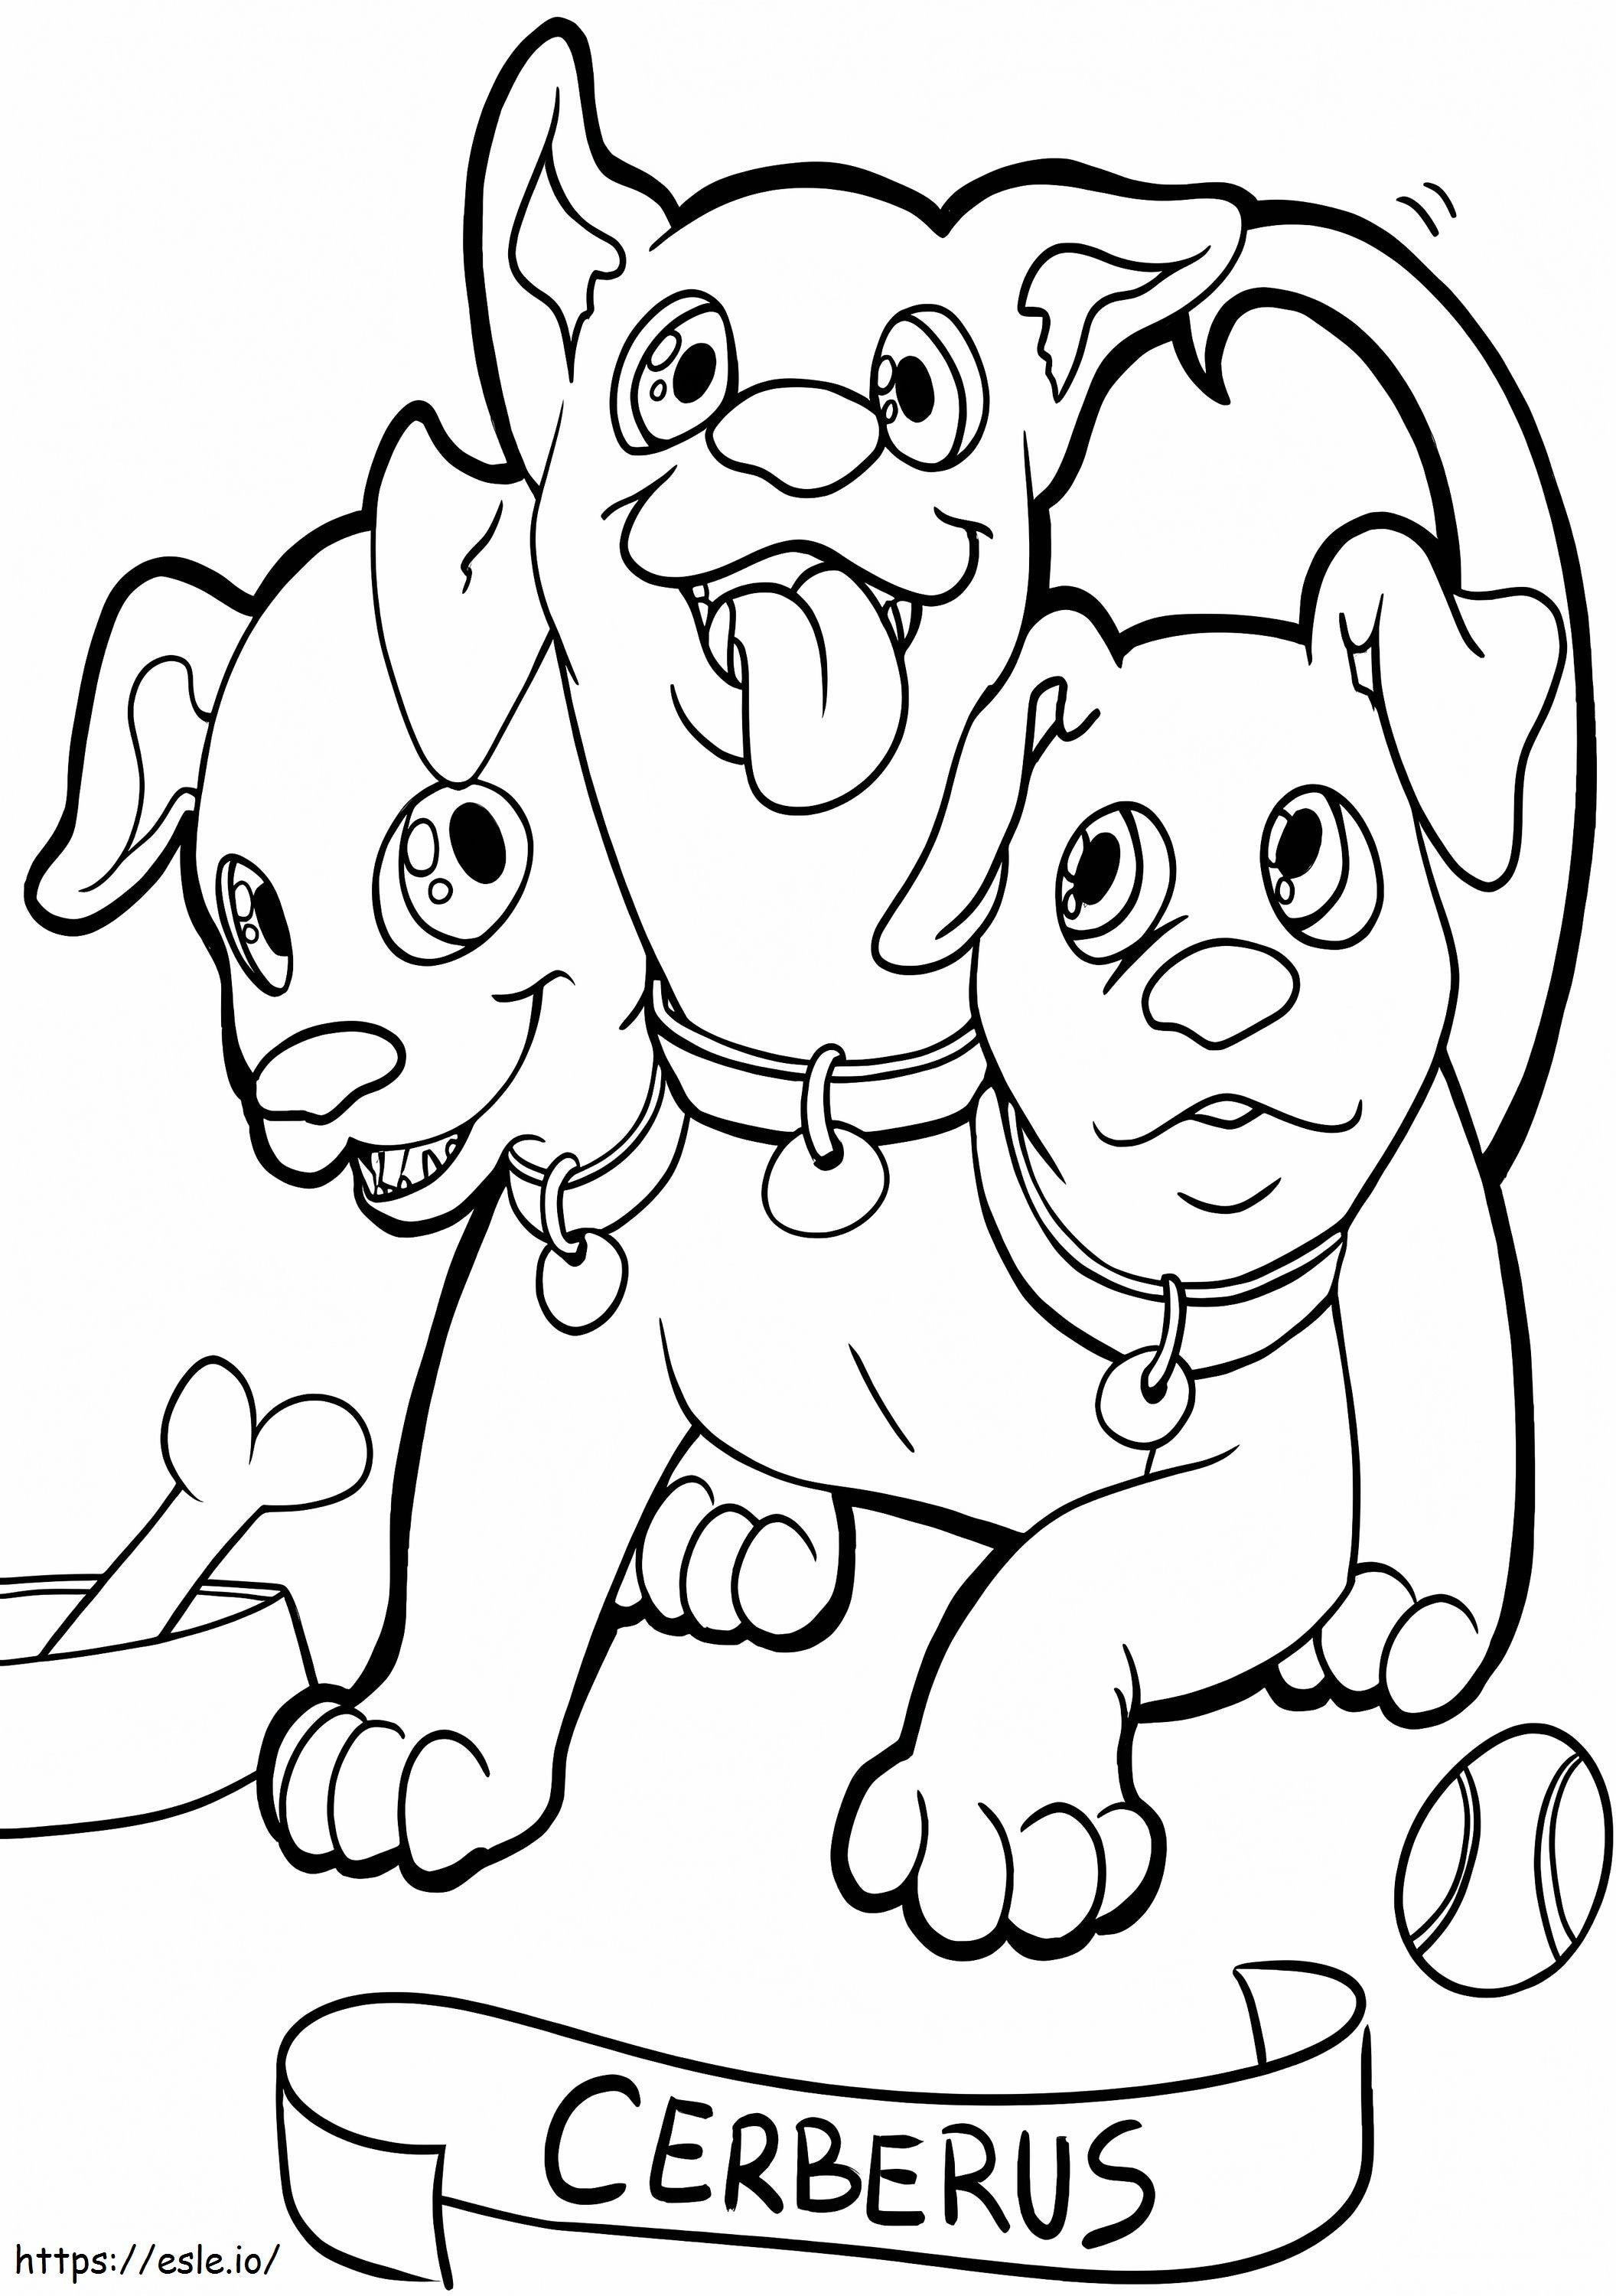 Baby Cerberus coloring page